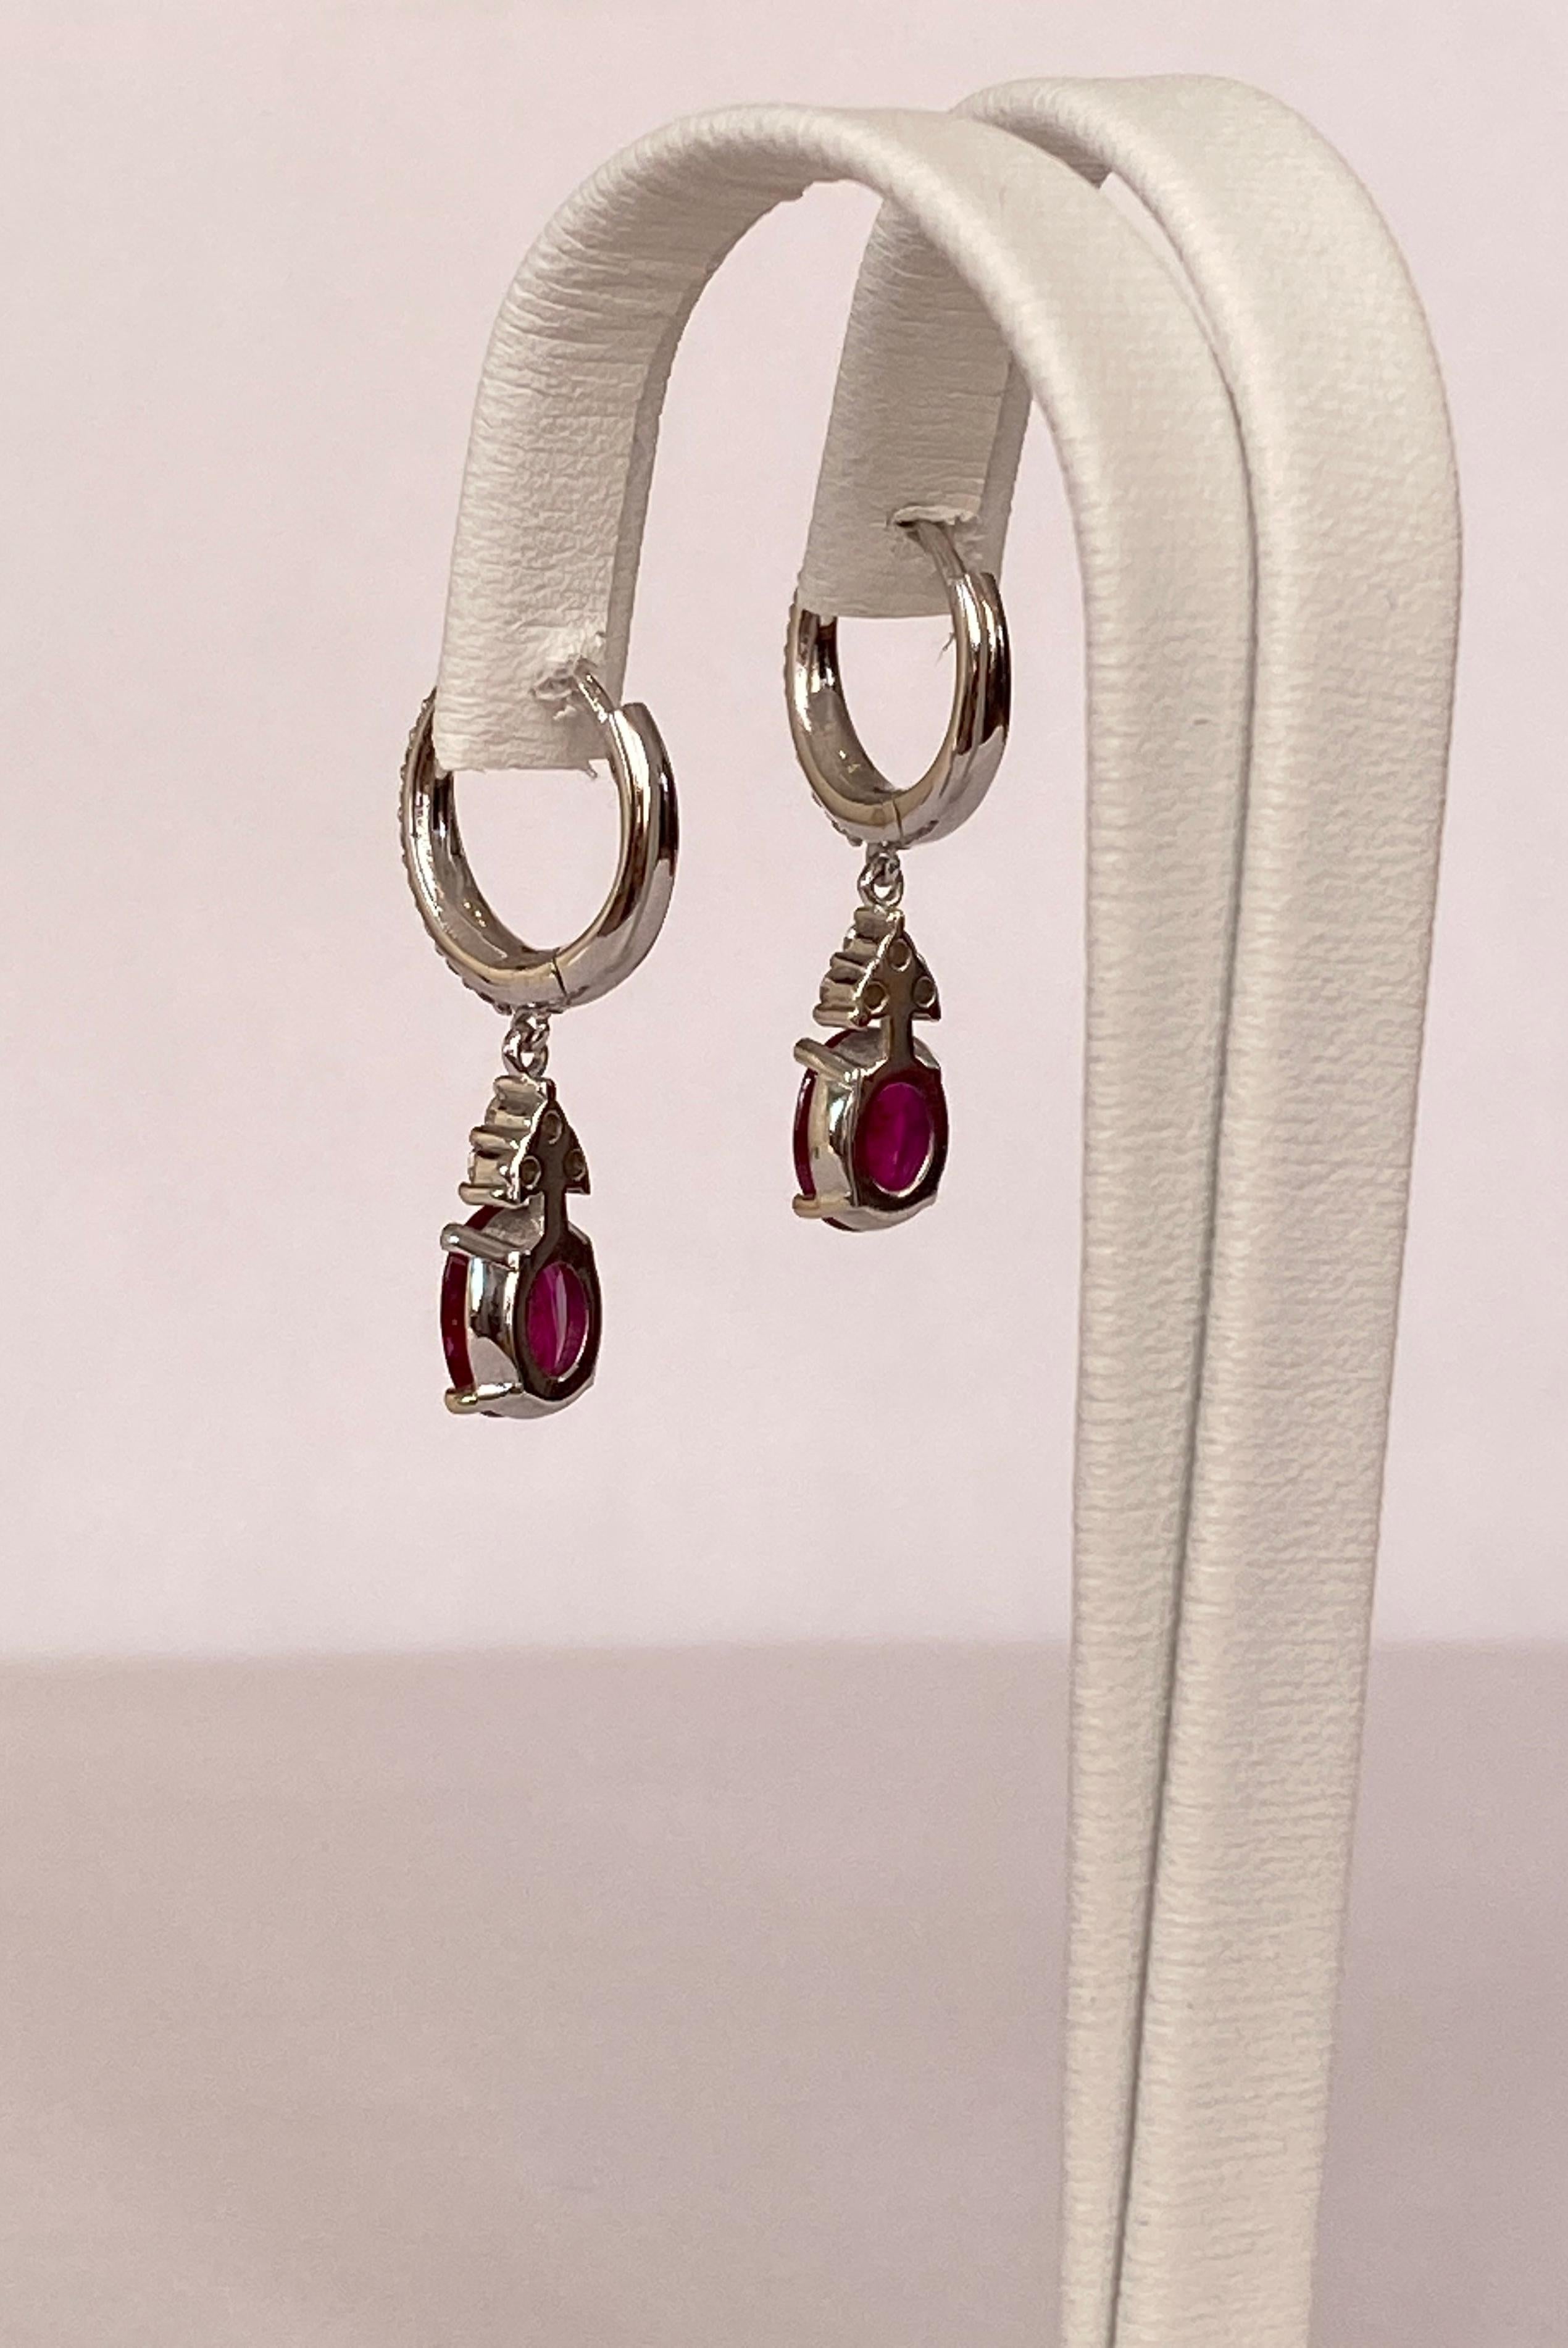 ALGT Certified 18 Kt. White Gold Earrings with 2.28 Ct Rubies and Diamonds For Sale 2